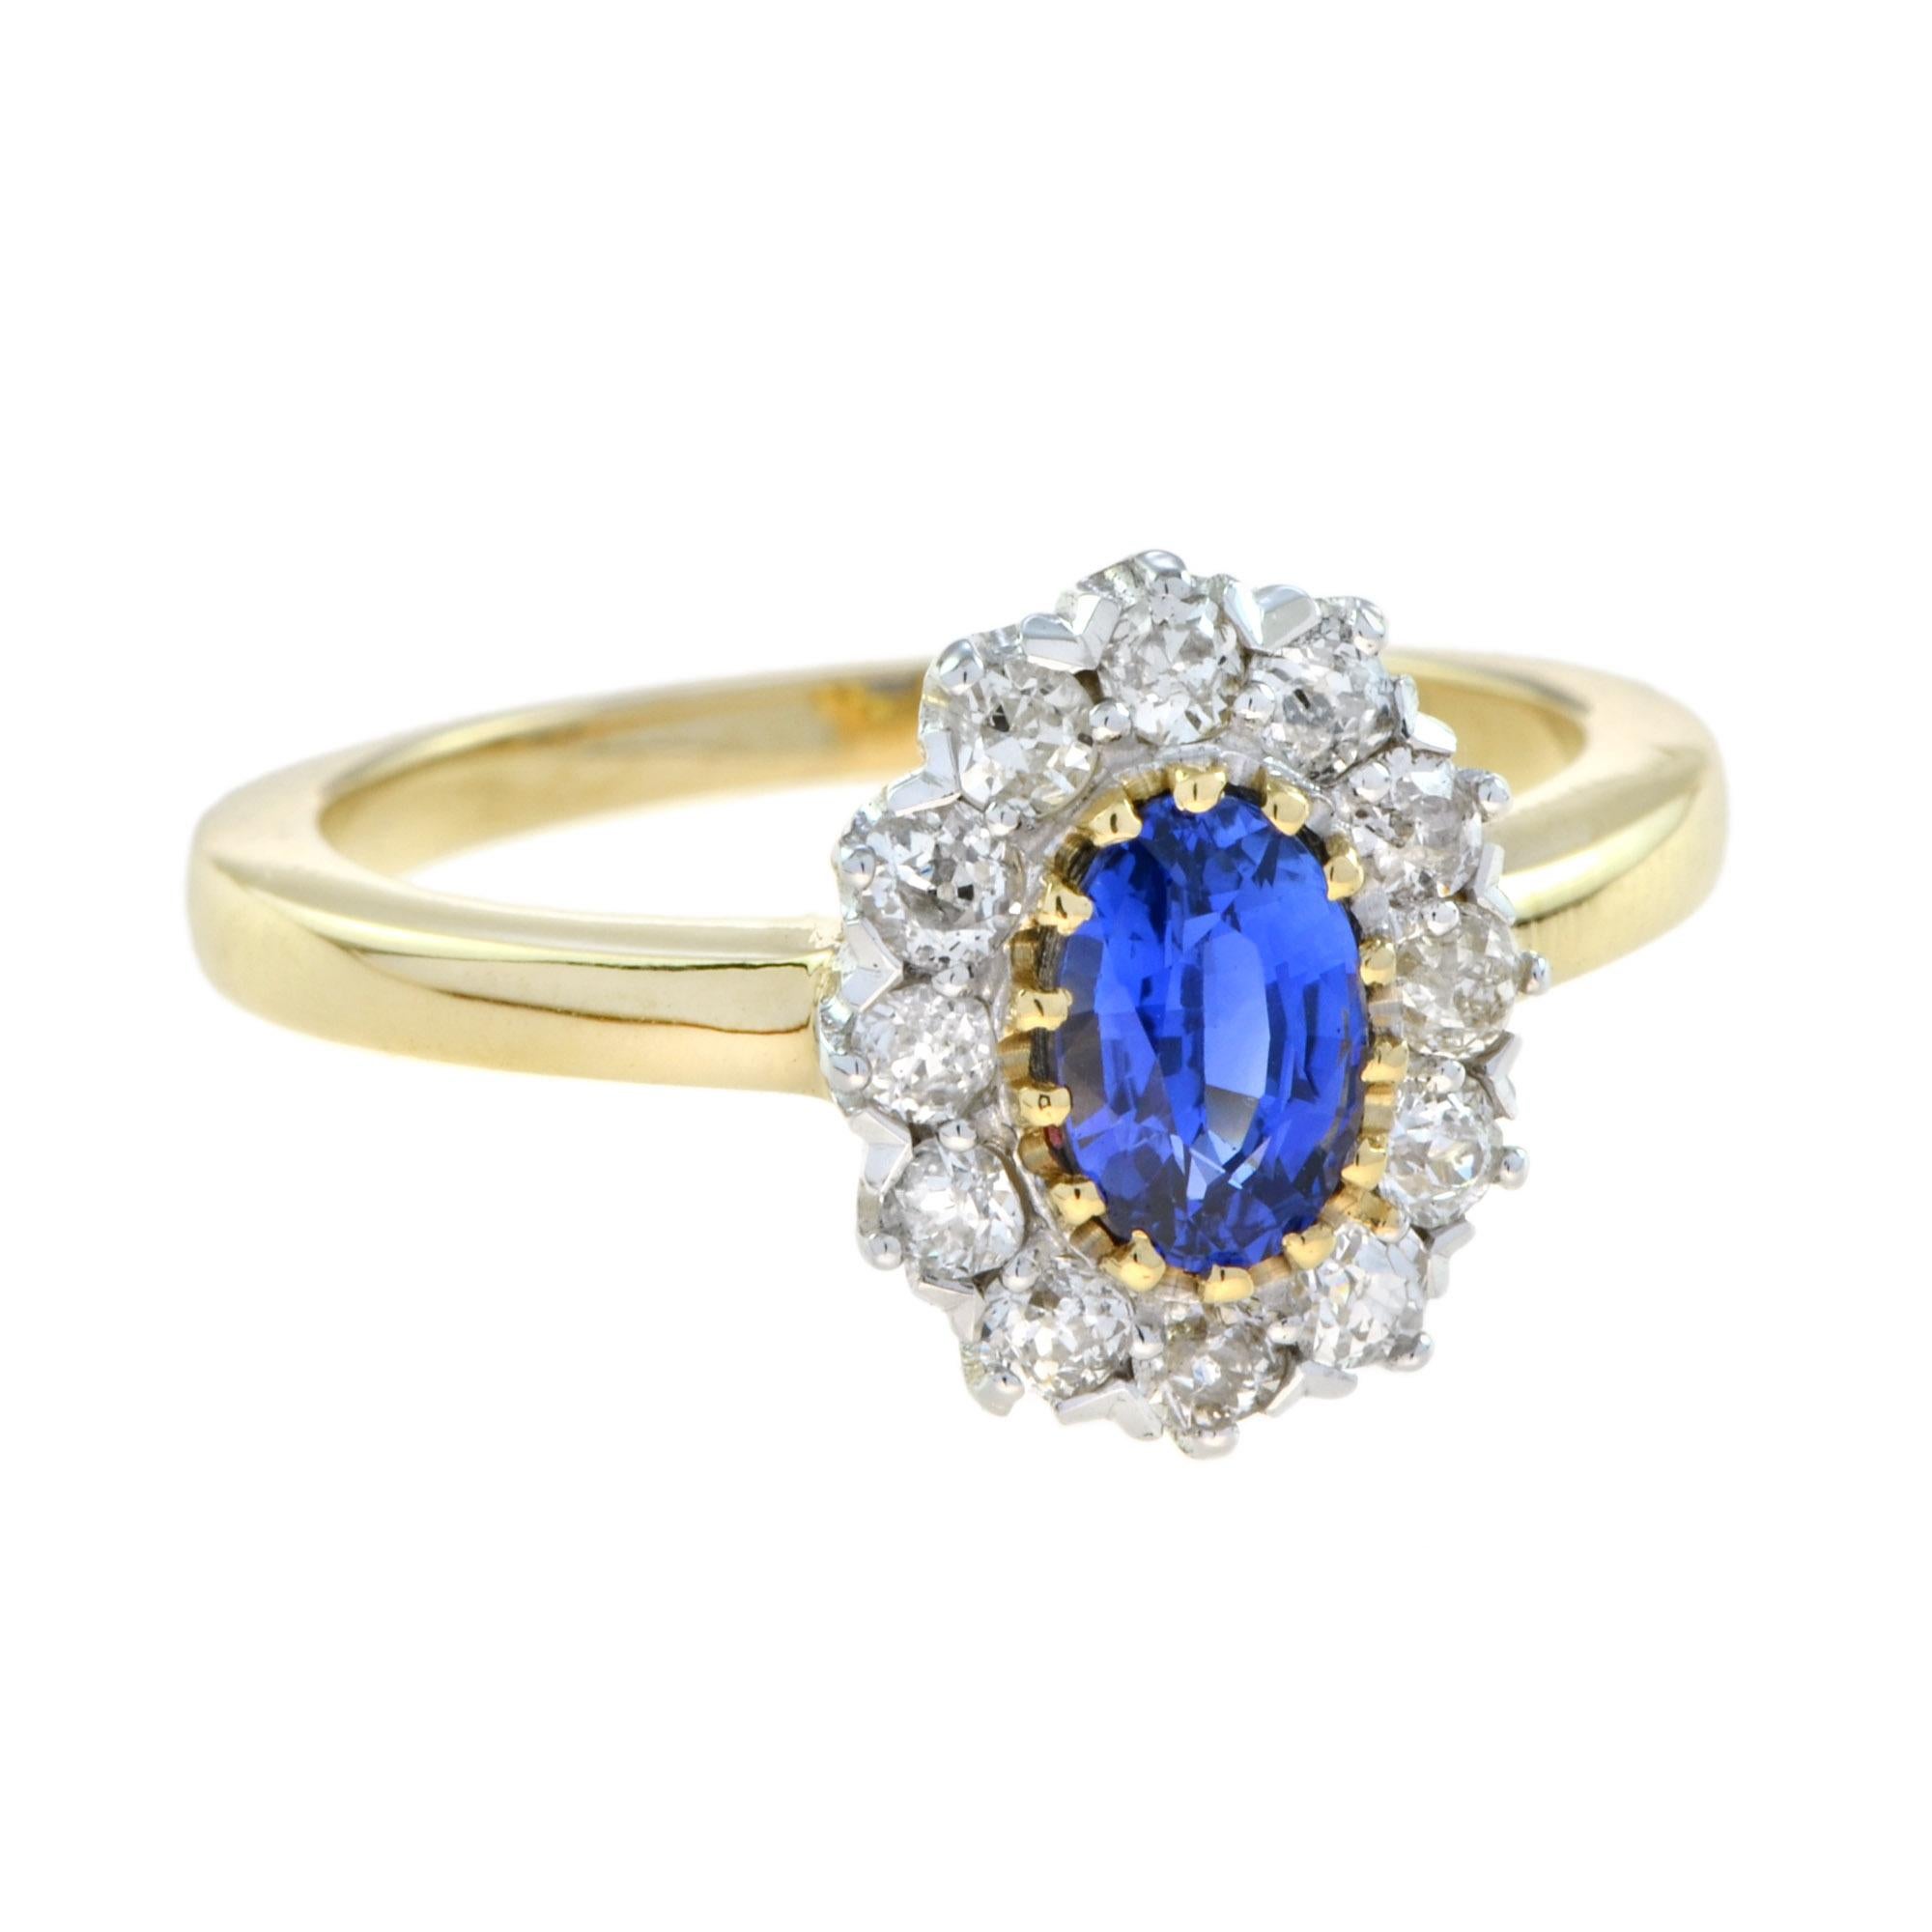 A sapphire ring in yellow gold with diamonds. An exquisite oval sapphire, weighing 0.85 carats, is set into 18k yellow gold and accentuated by a halo of diamonds.
Sapphires have been long associated with romance. This classic ring is a timeless